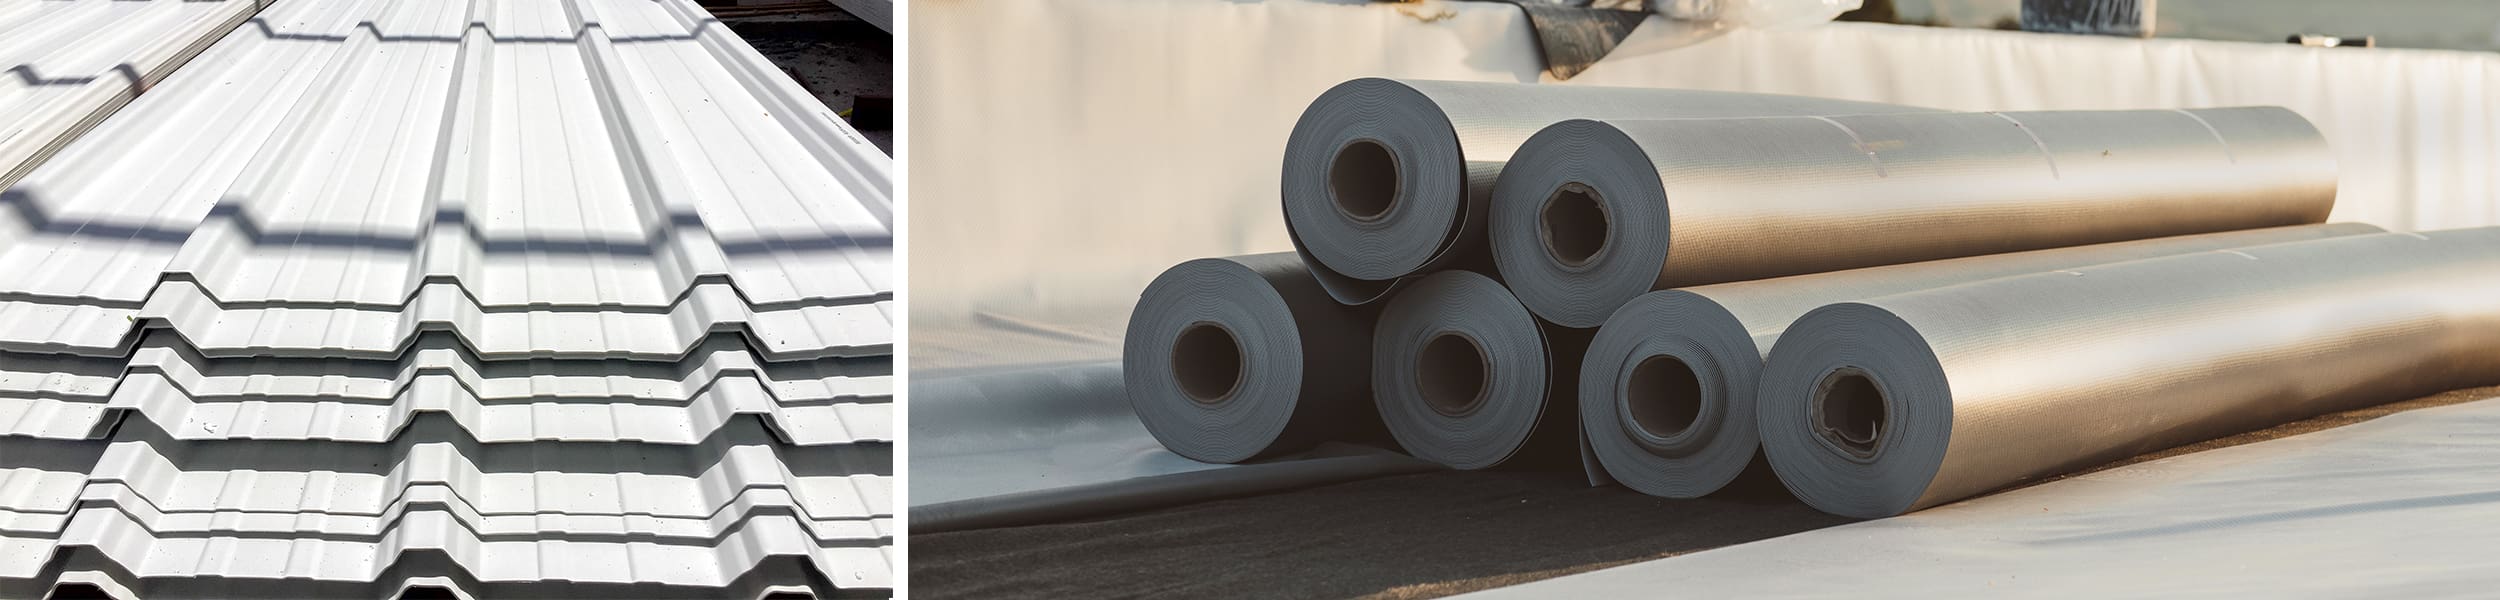 Aurora Material Solutions offers a variety of high-performance products for rigid and flexible film and sheet applications, such as thermoforming, signage, and pipe wrap.